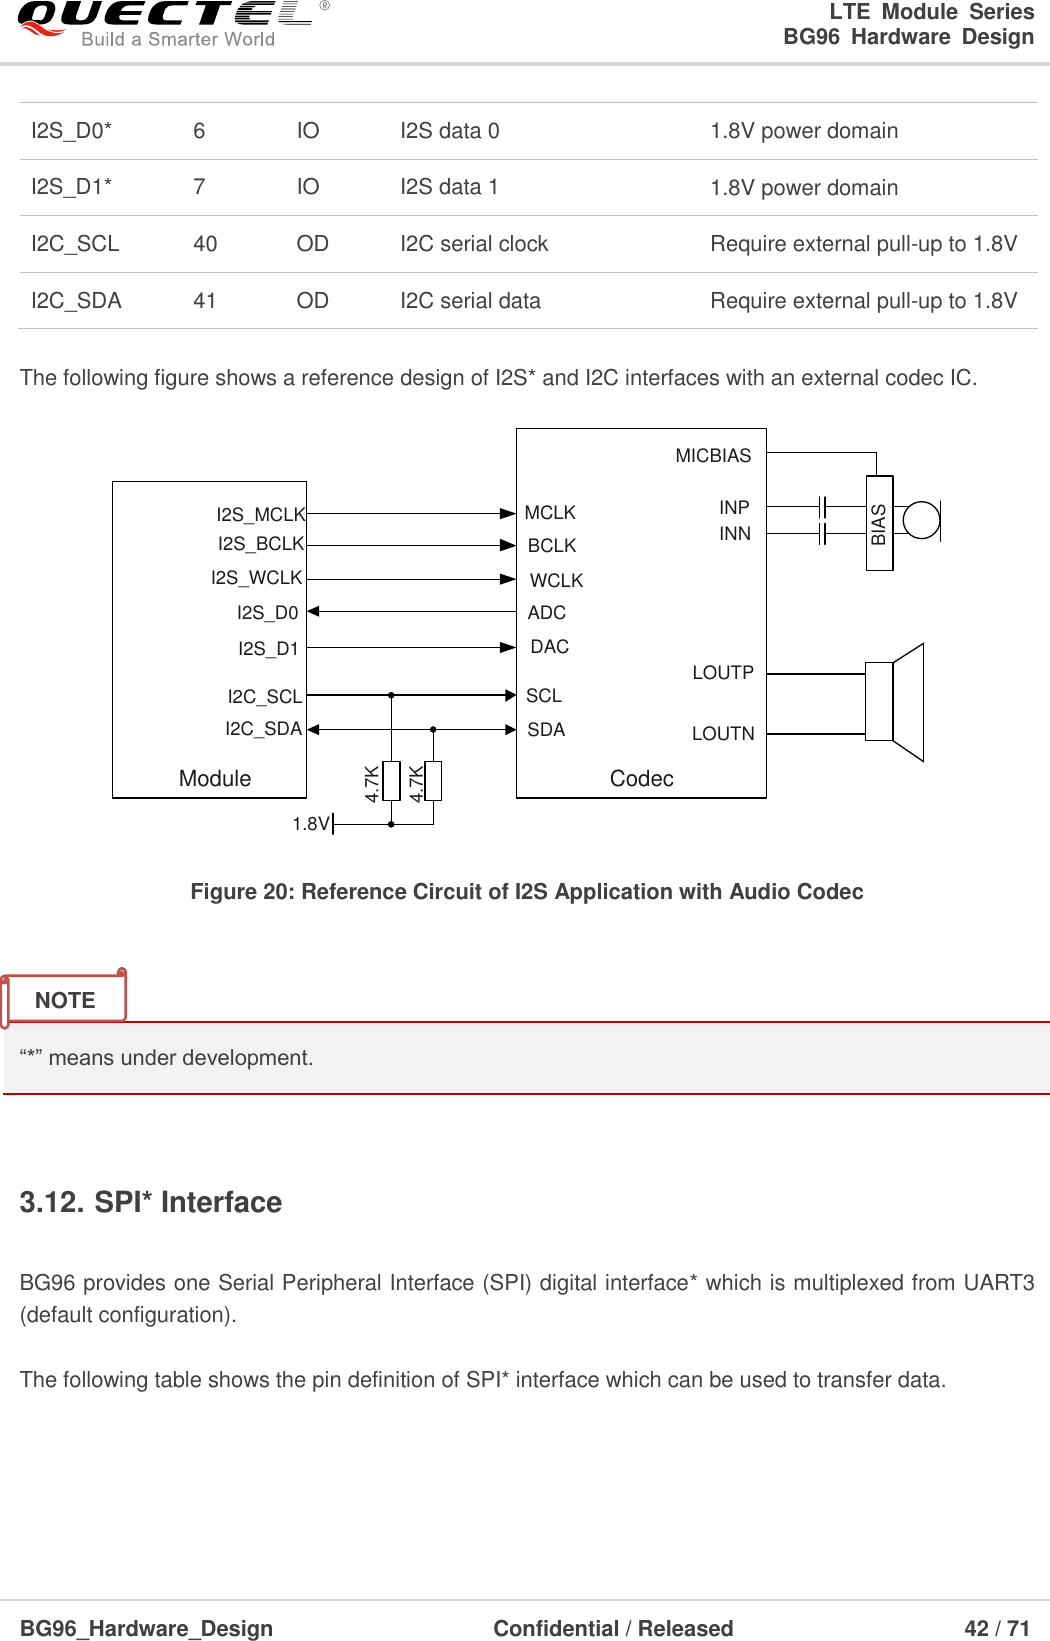 LTE  Module  Series                                                  BG96  Hardware  Design  BG96_Hardware_Design                              Confidential / Released                             42 / 71    I2S_D0* 6 IO I2S data 0 1.8V power domain I2S_D1* 7 IO I2S data 1 1.8V power domain I2C_SCL 40 OD I2C serial clock Require external pull-up to 1.8V I2C_SDA 41 OD I2C serial data Require external pull-up to 1.8V  The following figure shows a reference design of I2S* and I2C interfaces with an external codec IC. I2S_D0I2S_WCLKI2S_BCLKI2S_MCLKI2C_SCLI2C_SDAModule1.8V4.7K4.7KMCLKBCLKWCLKADCSCLSDABIASMICBIASINPINNLOUTPLOUTNCodecI2S_D1 DAC Figure 20: Reference Circuit of I2S Application with Audio Codec   “*” means under development.  3.12. SPI* Interface  BG96 provides one Serial Peripheral Interface (SPI) digital interface* which is multiplexed from UART3 (default configuration).  The following table shows the pin definition of SPI* interface which can be used to transfer data.   NOTE 